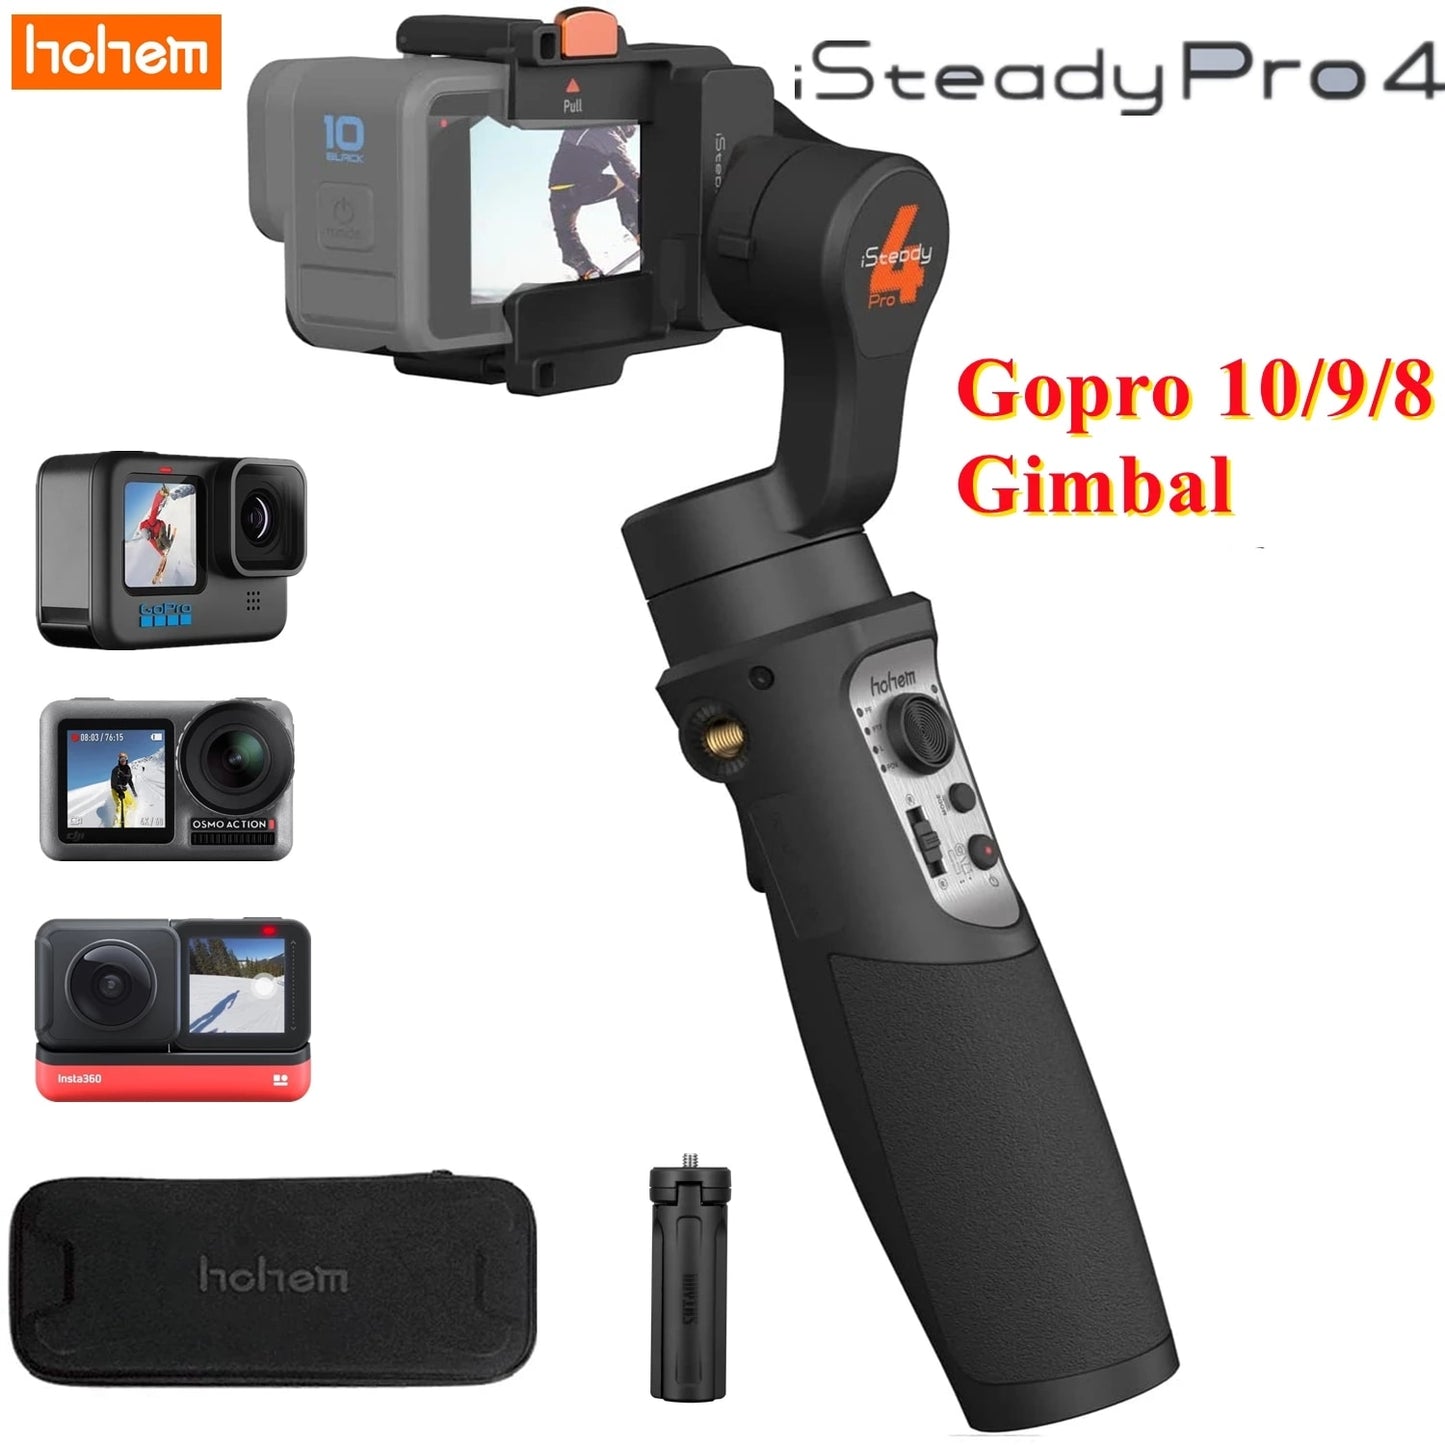 Gopro 10 Gimbal 3-Axis Handheld Action Camera Stabilizer for Gopro 10/9/8/7/6/5/4,OSMO Action,Insta360-Hohem iSteady Pro 4/Pro 3